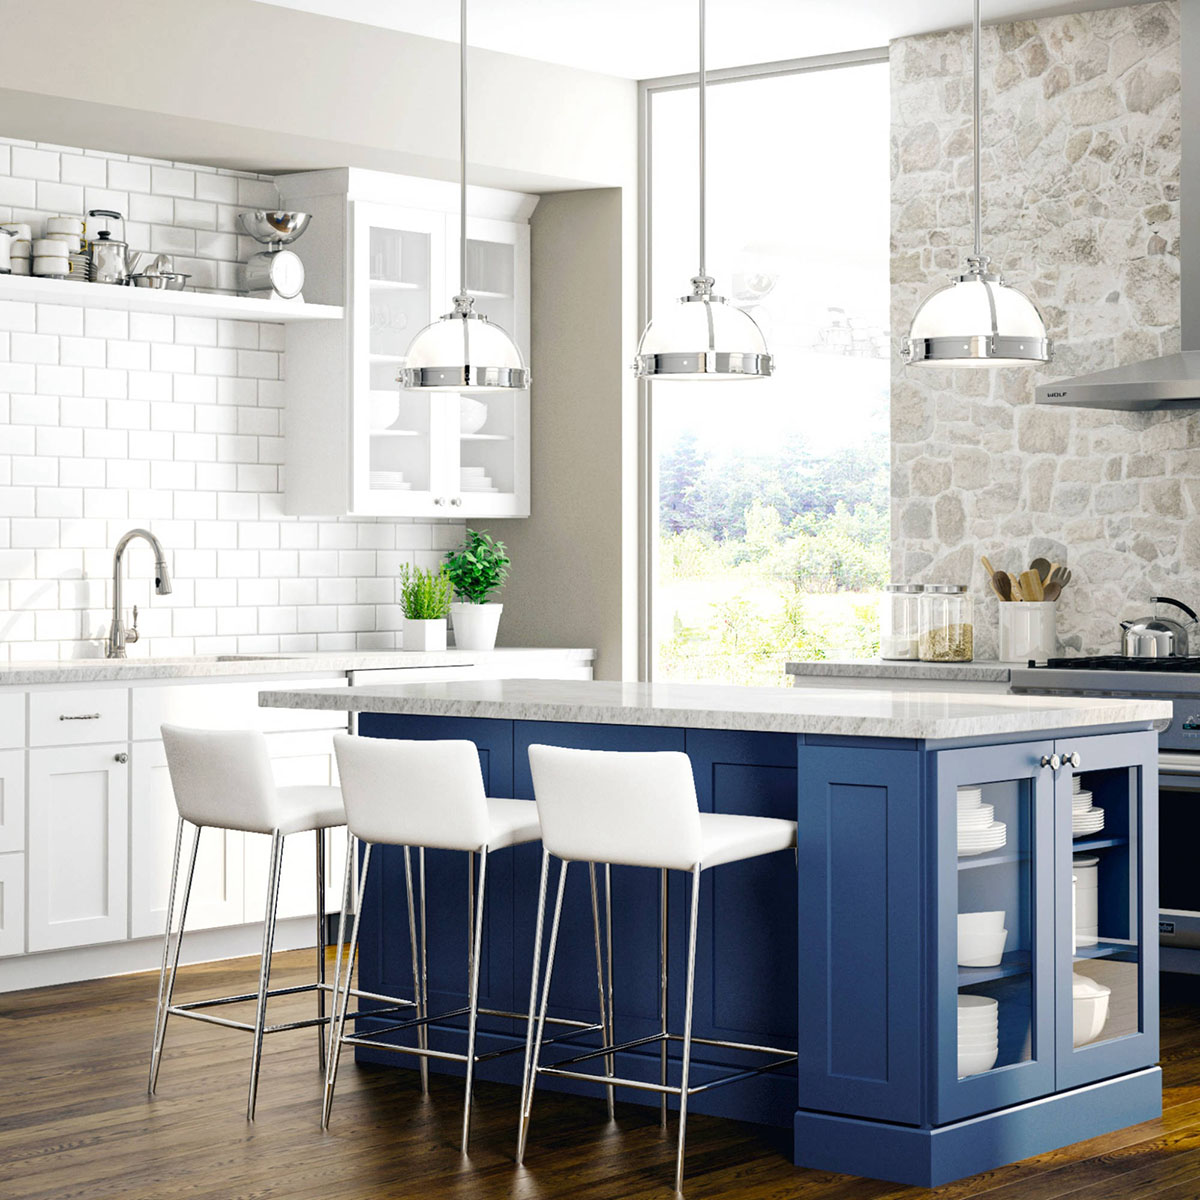 Are kitchen and bathroom cabinets really that different from each other?